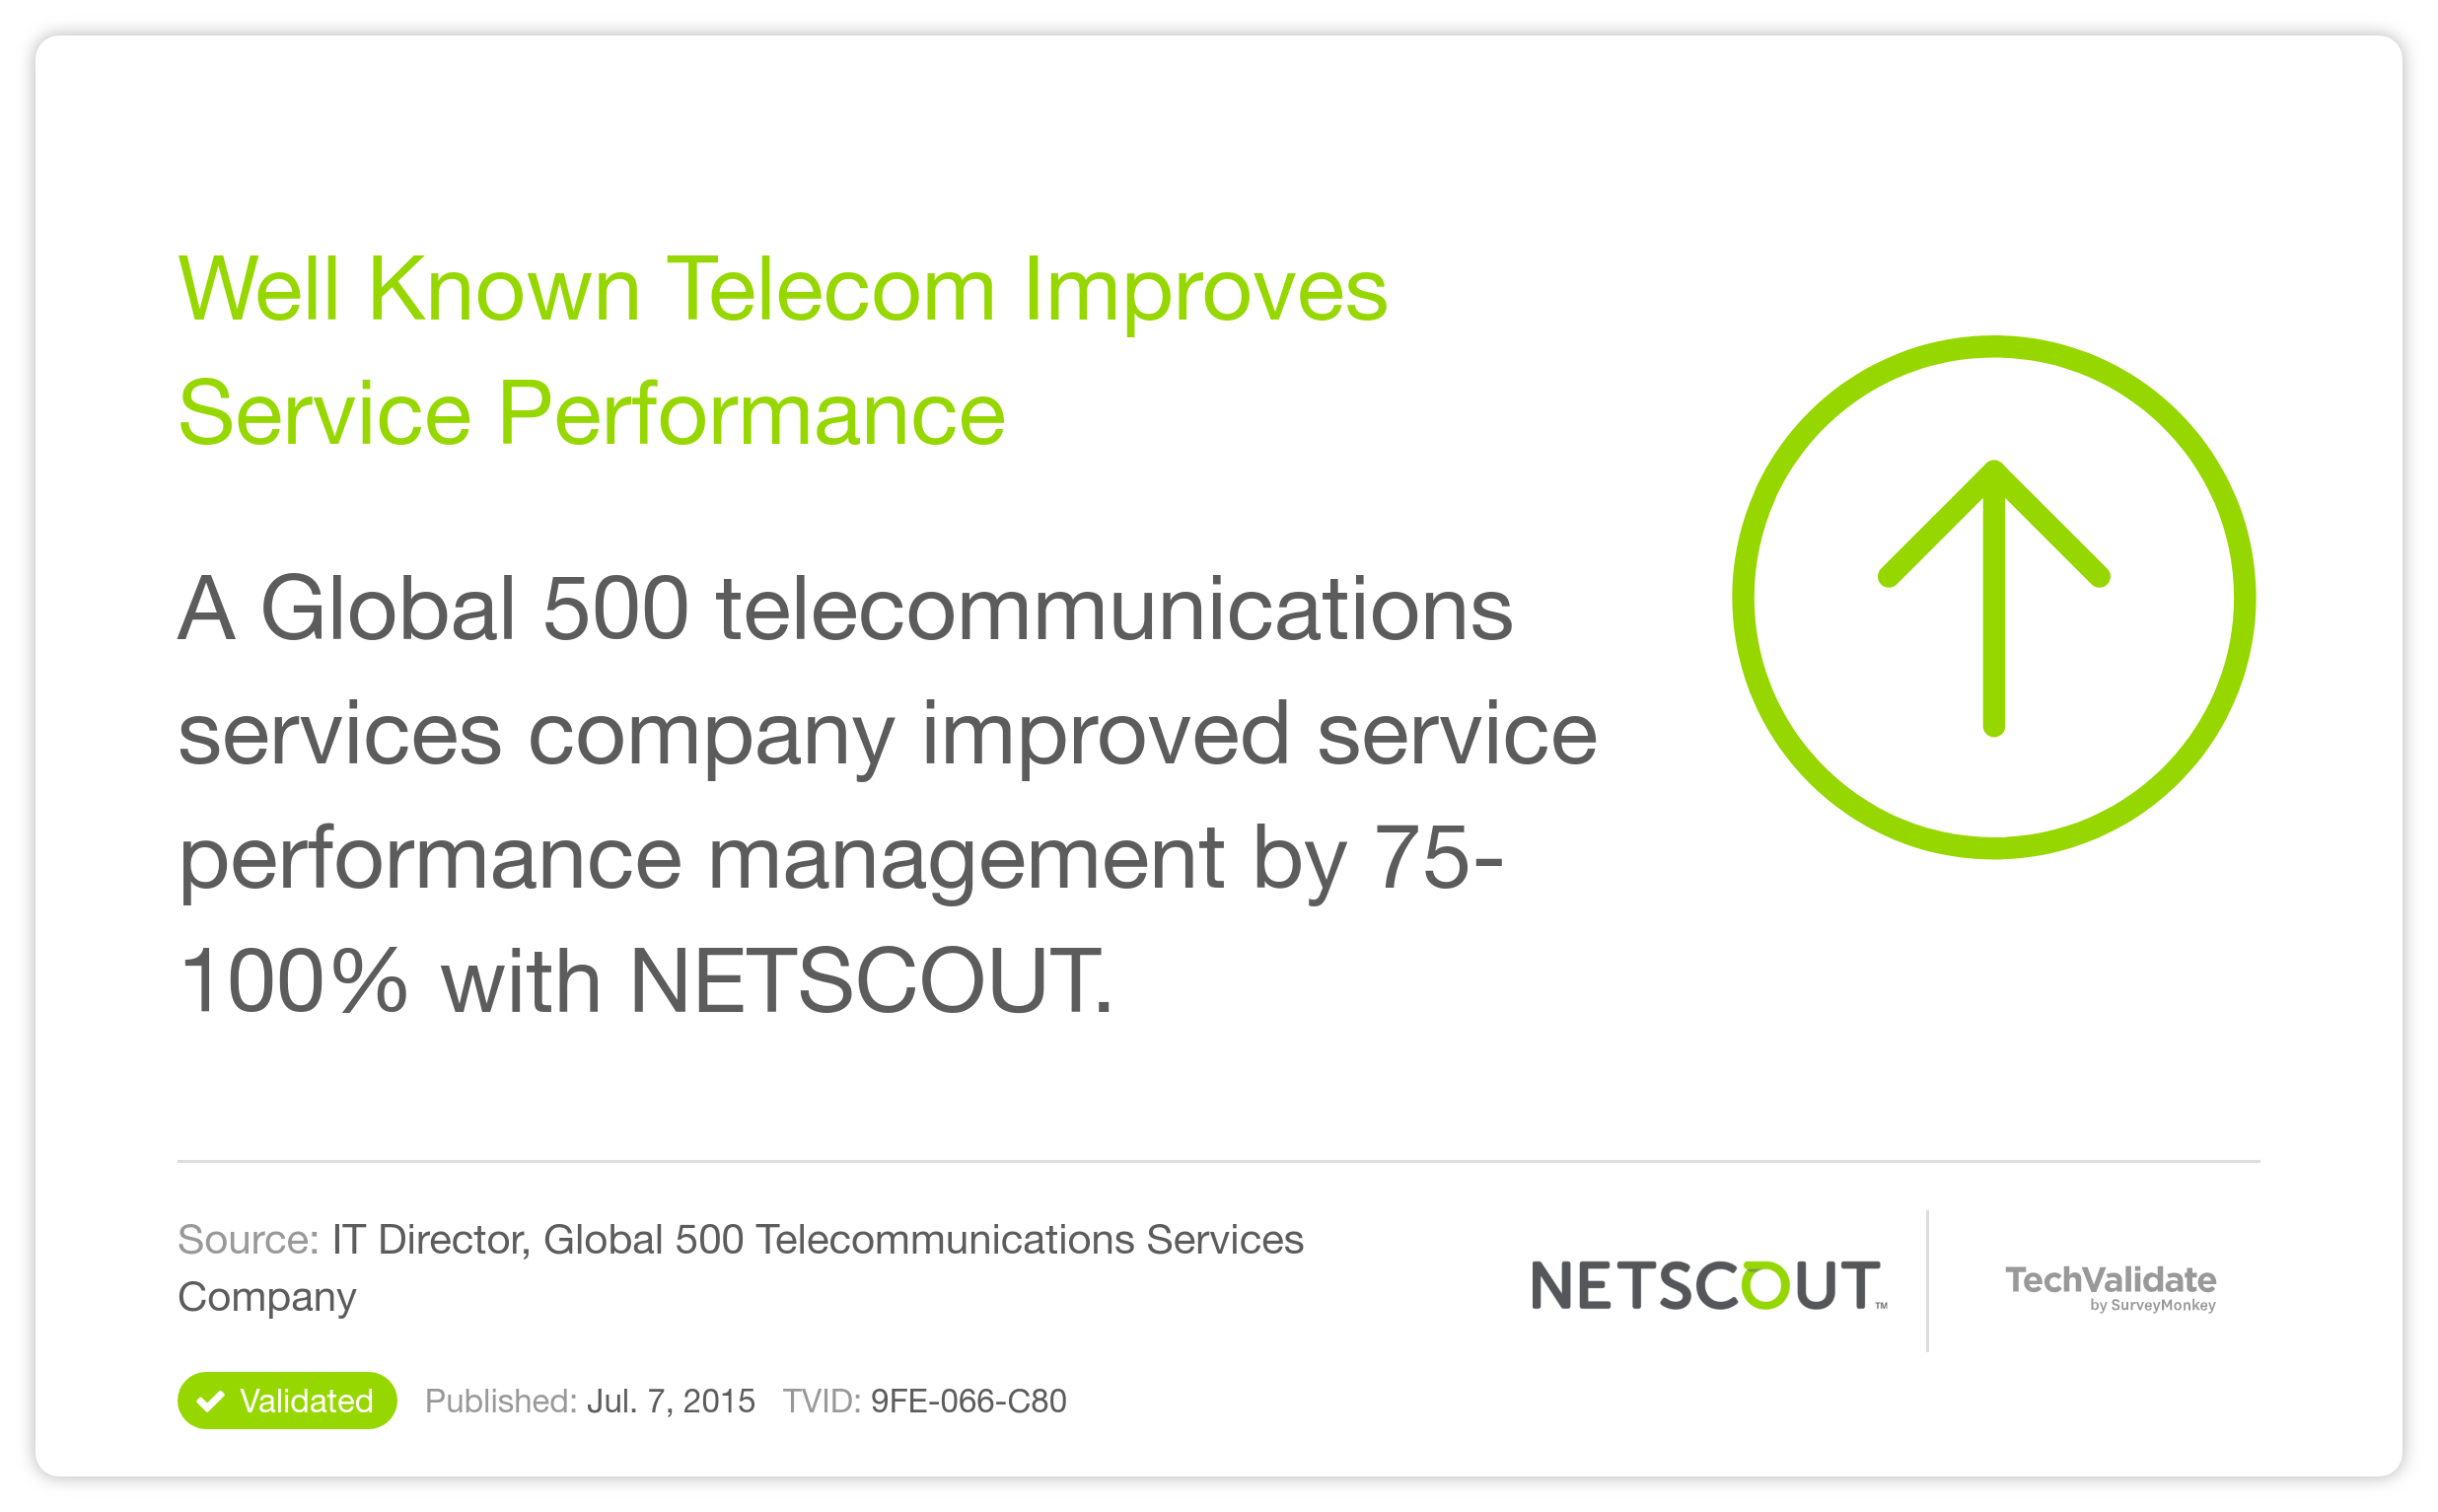 Well Known Telecom Improves Service Performance